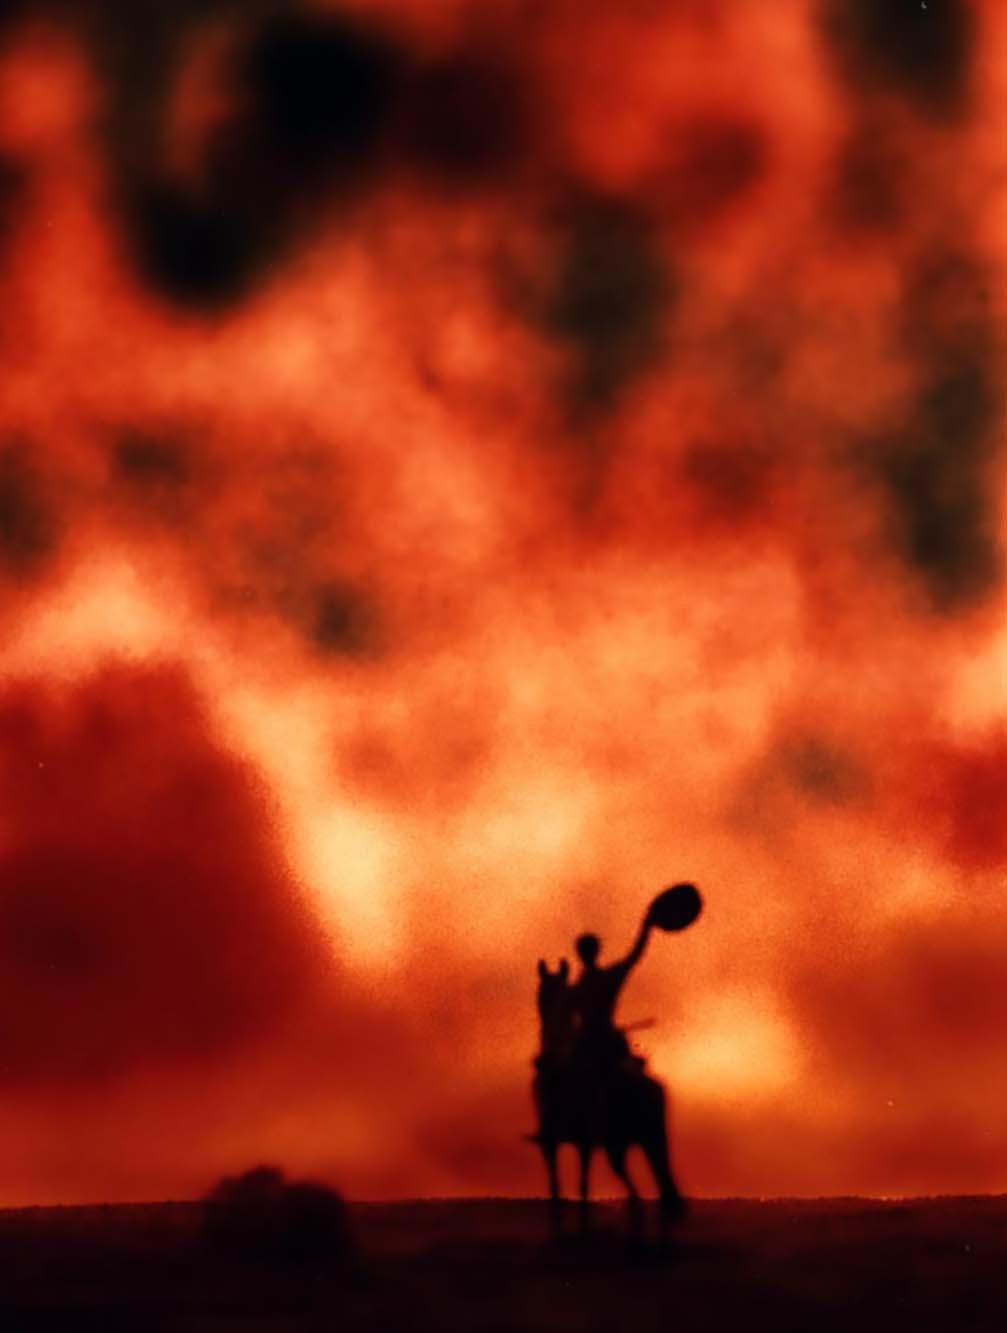 Vintage darkroom Cowboy photograph In the style of Richard Prince circa late 1980s:

A superbly rendered vintage darkroom photograph, surrealistically exploring the mythology of the American cowboy set amidst blazing skies. Rendered much in the